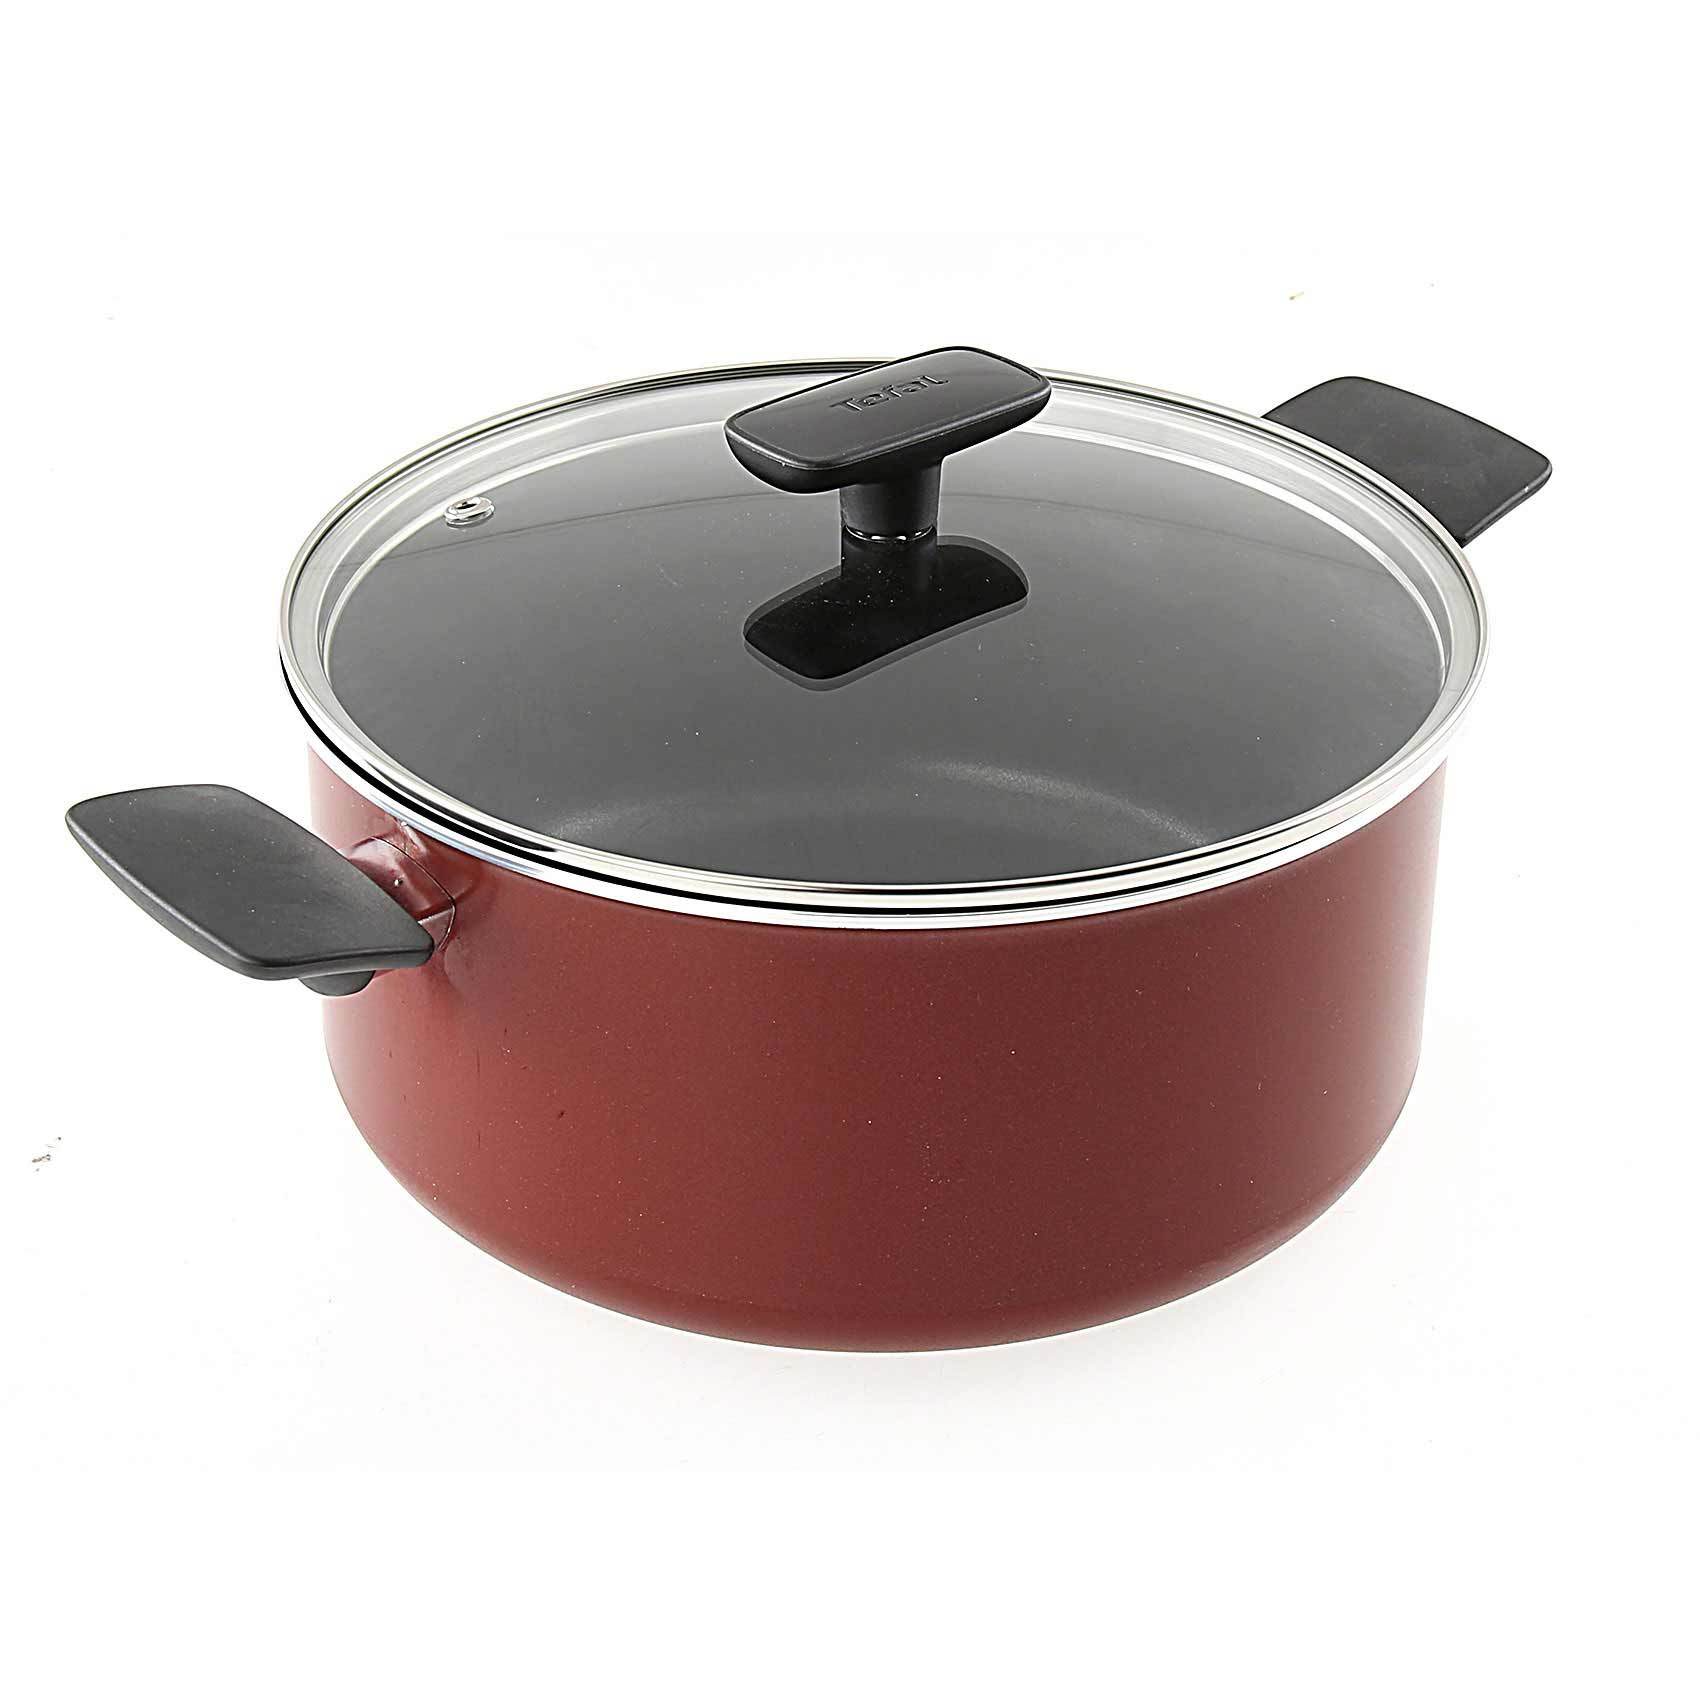 buy tefal simplicity casserole 24 with cover online shop home garden on carrefour jordan